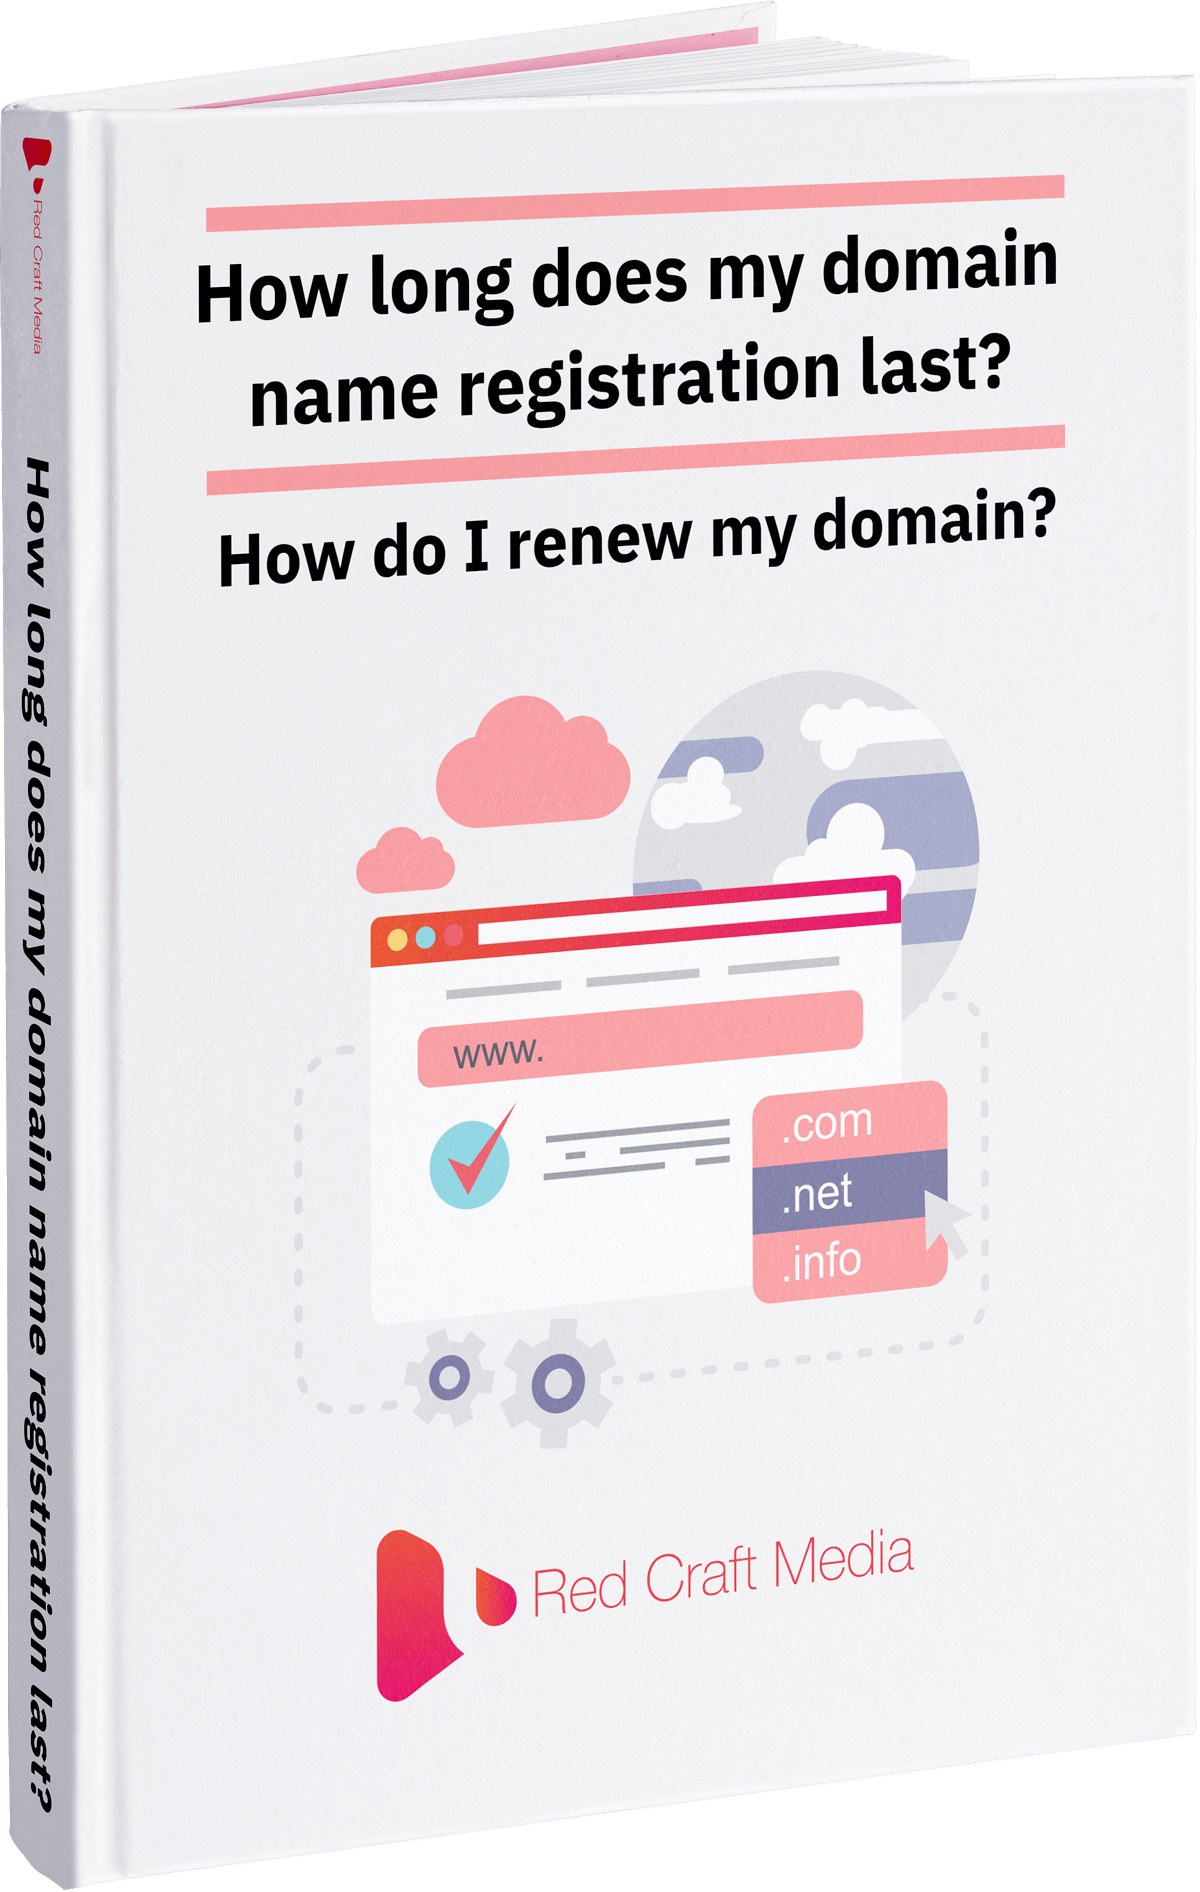 How Long Does my Domain Name Registration Last?